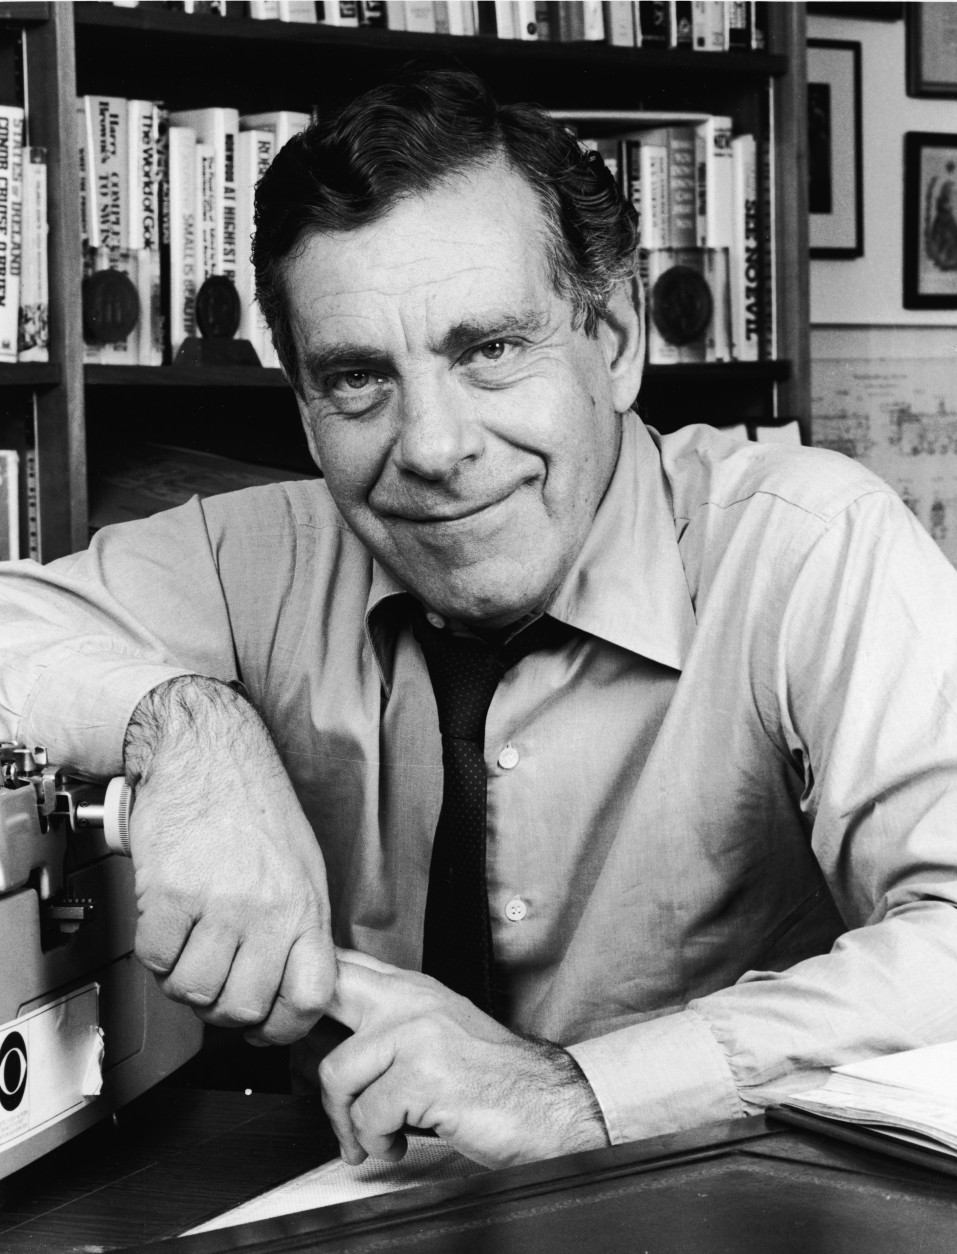 Portrait of Canadian-born television journalist Morley Safer, of the news program '60 Minutes', circa 1970s. (Photo by Hulton Archive/Getty Images)